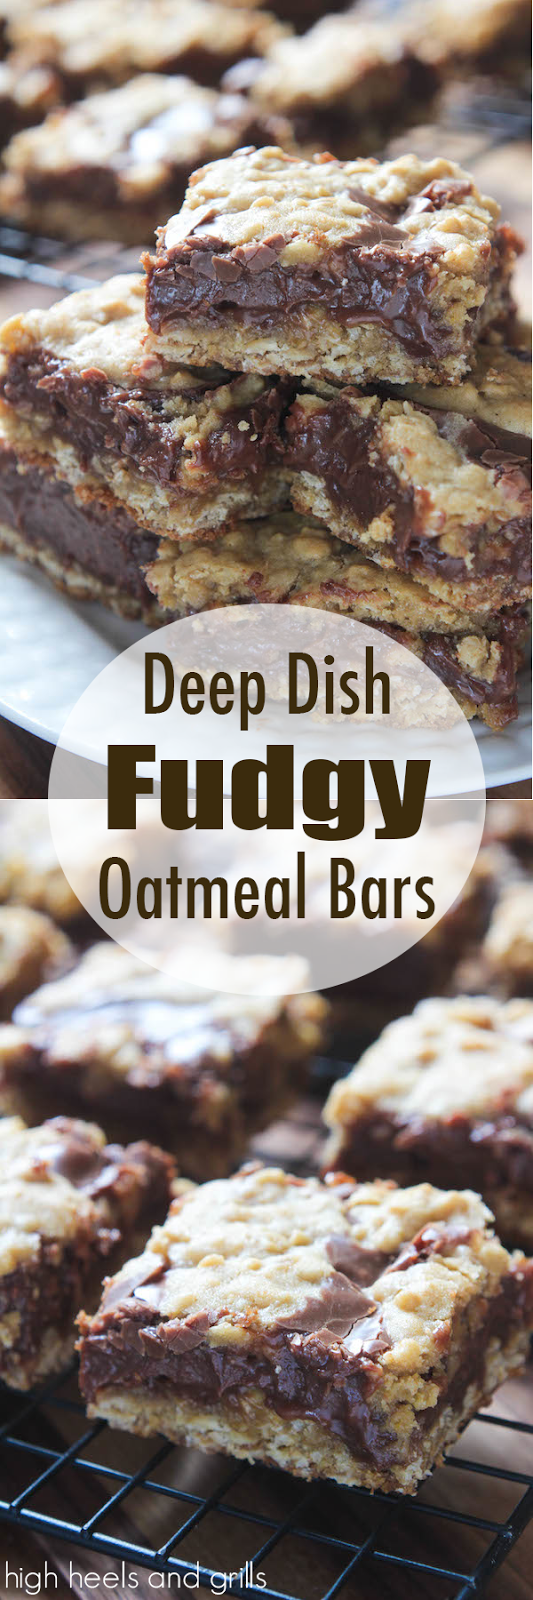 These Deep Dish Fudgy Oatmeal Bars have a fudge center, sandwiched between two oatmeal layers. They taste incredible and have an amazing texture! They're one of my top five favorite desserts I've ever had.